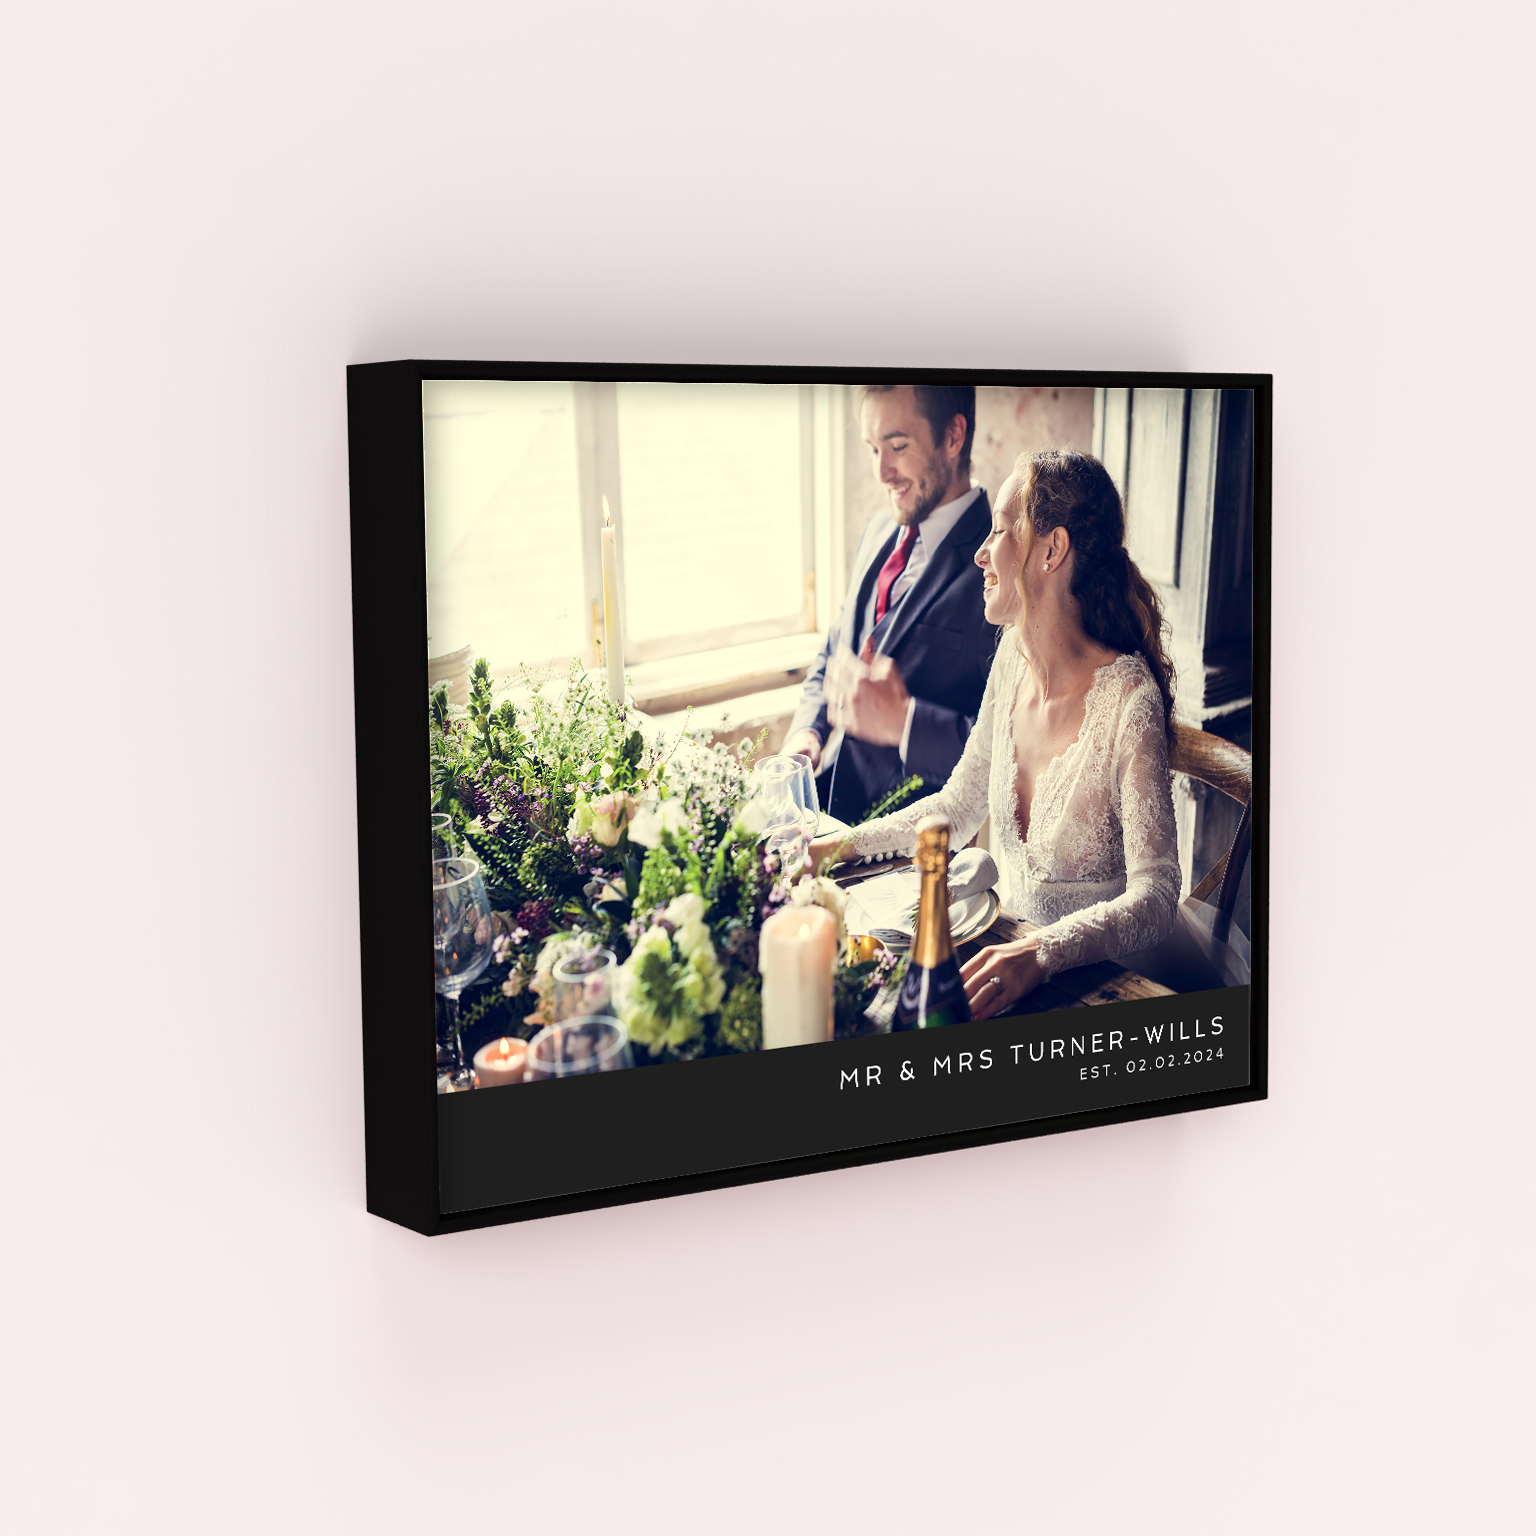 Wall Art Framed Prints featuring Wedding Bliss design - Create a beautiful keepsake with your cherished wedding memories